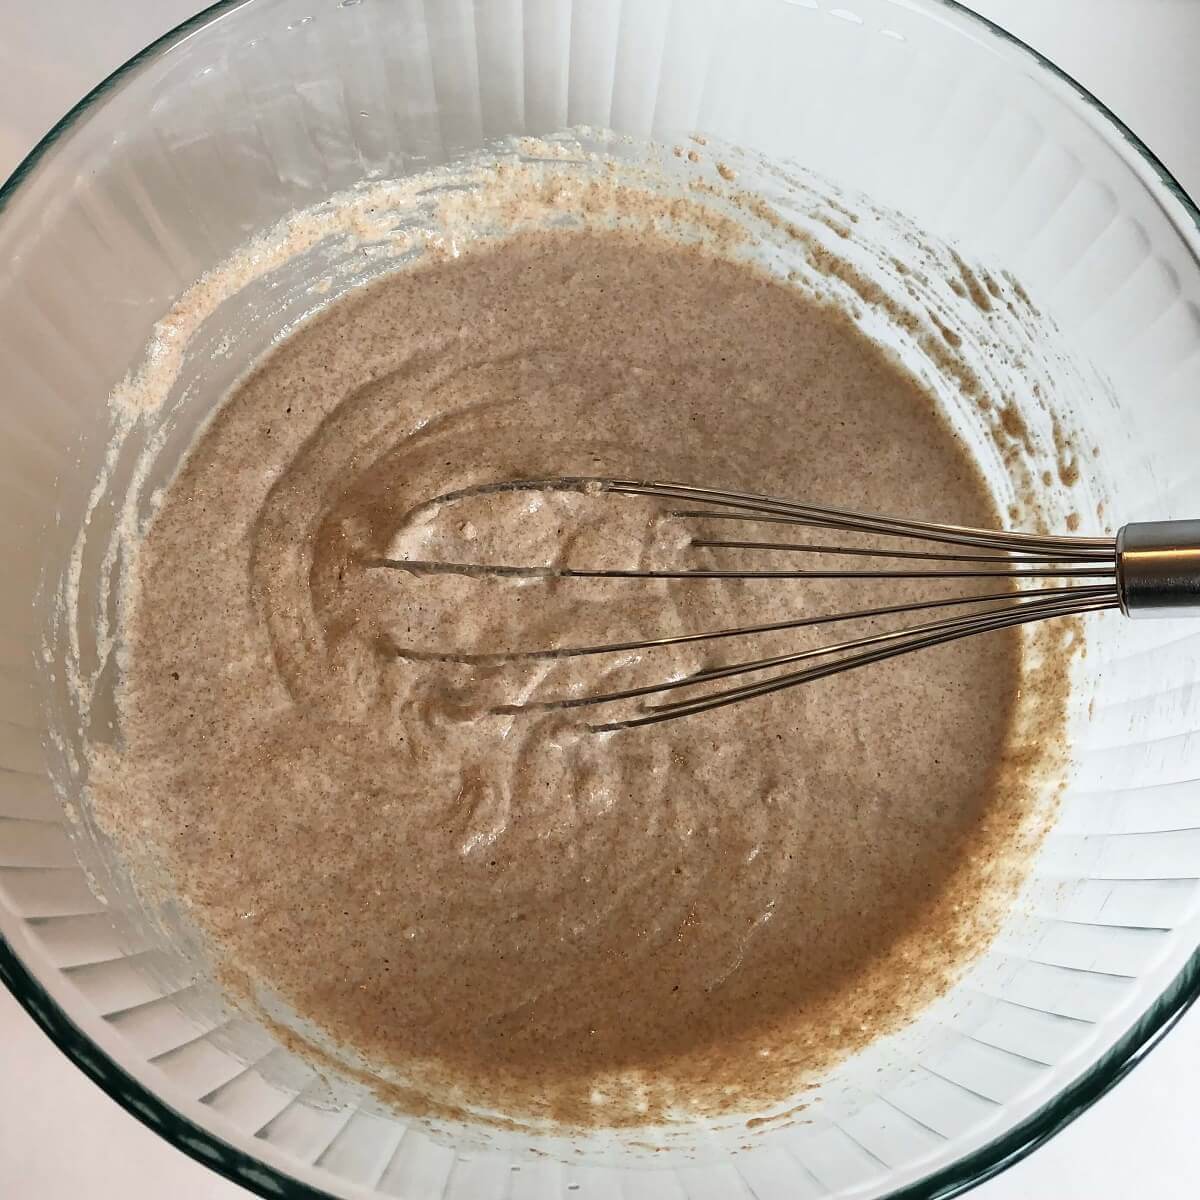 Pancake batter in a glass mixing bowl with a whisk.